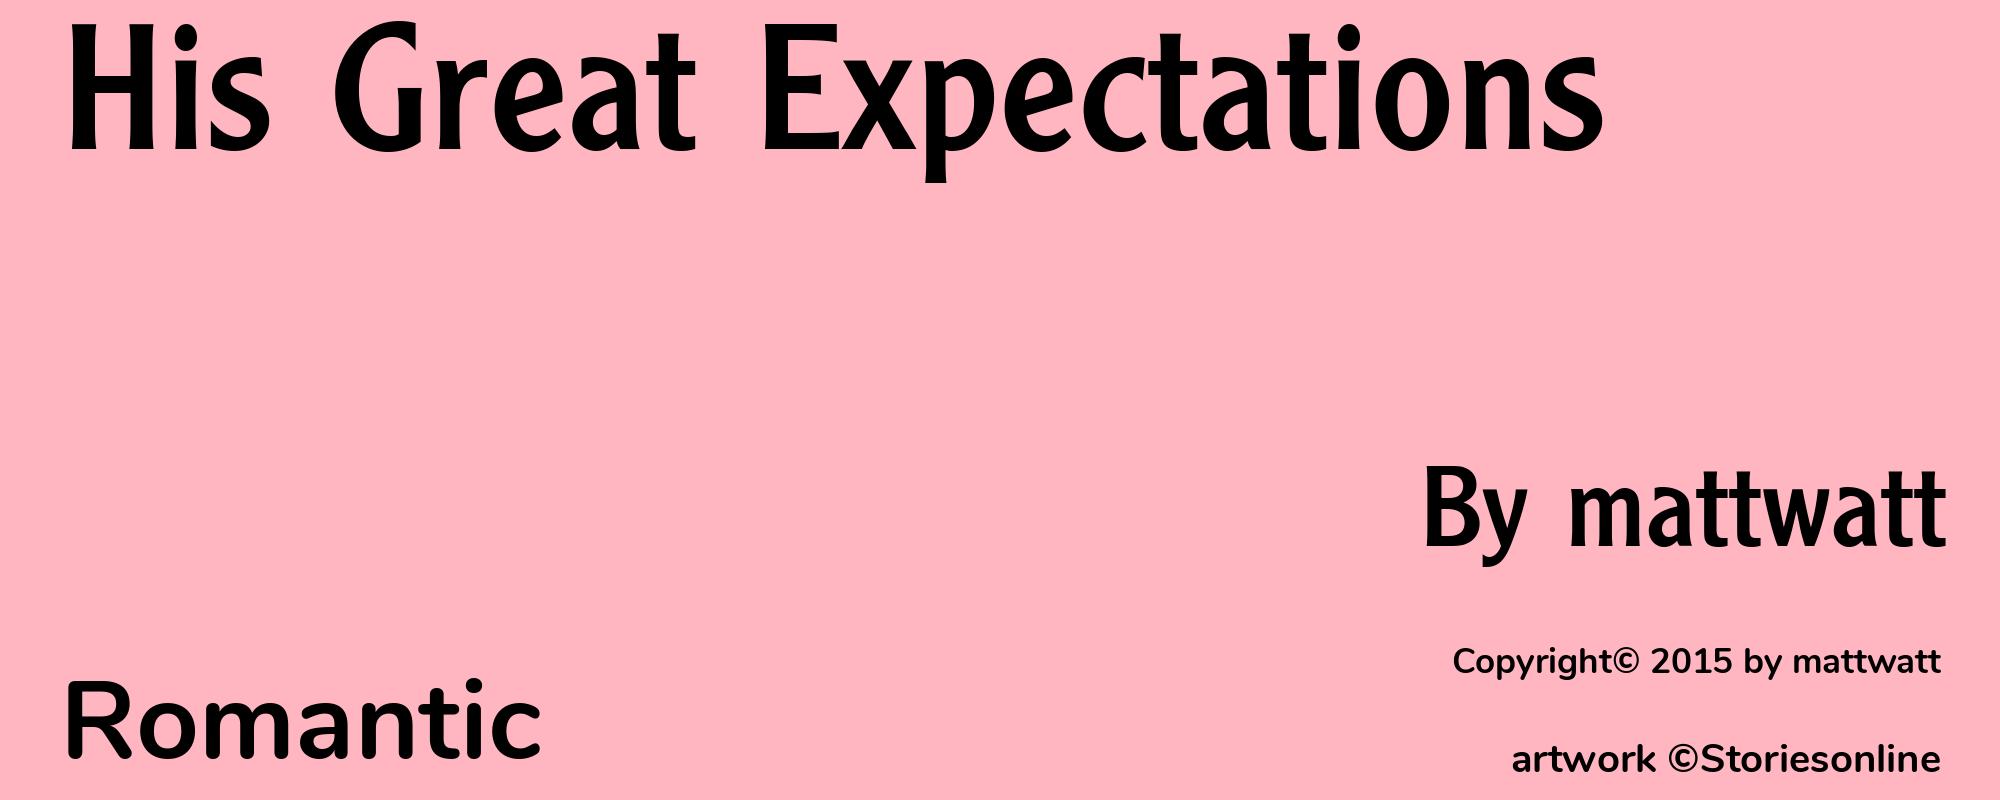 His Great Expectations - Cover